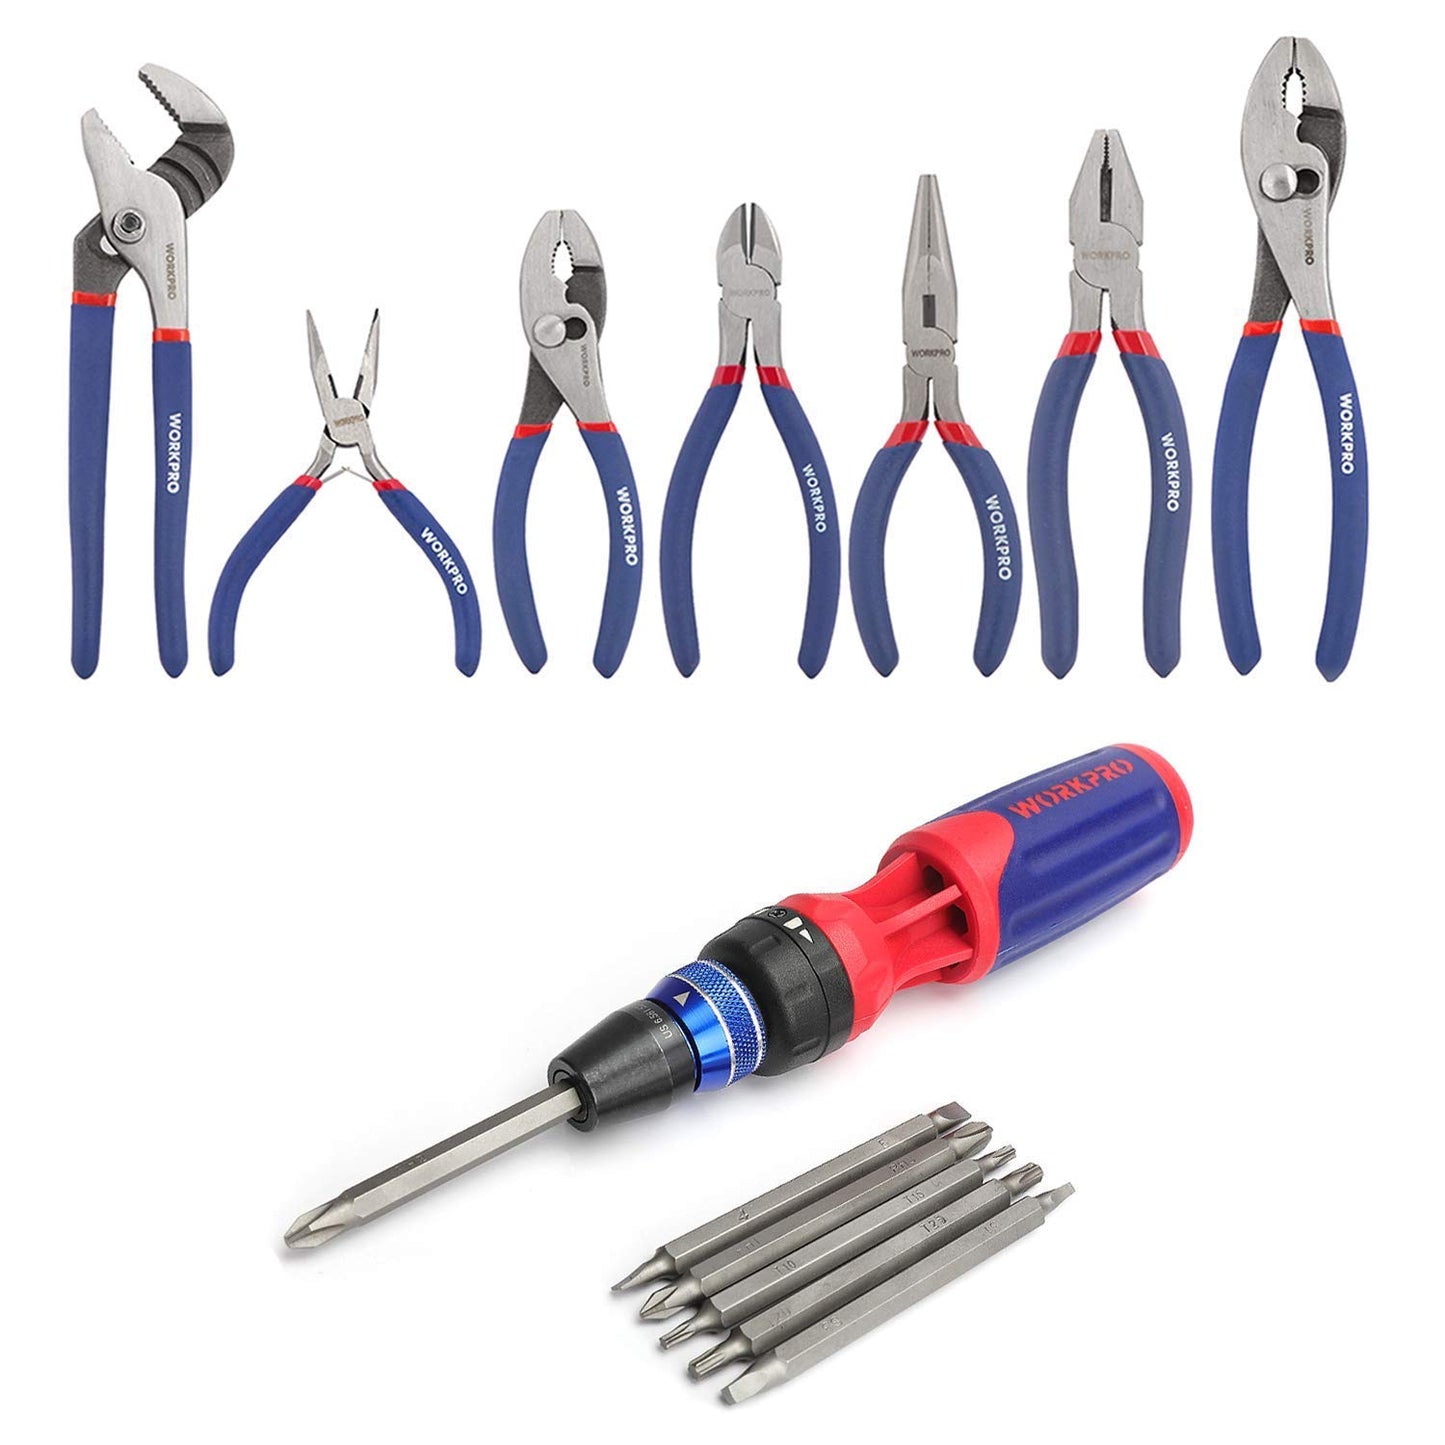 WORKPRO 12-in-1 Multi-Bit Ratcheting Screwdriver with Quick-load Mechanism and WORKPRO 7-piece Pliers Set for DIY & Home Use